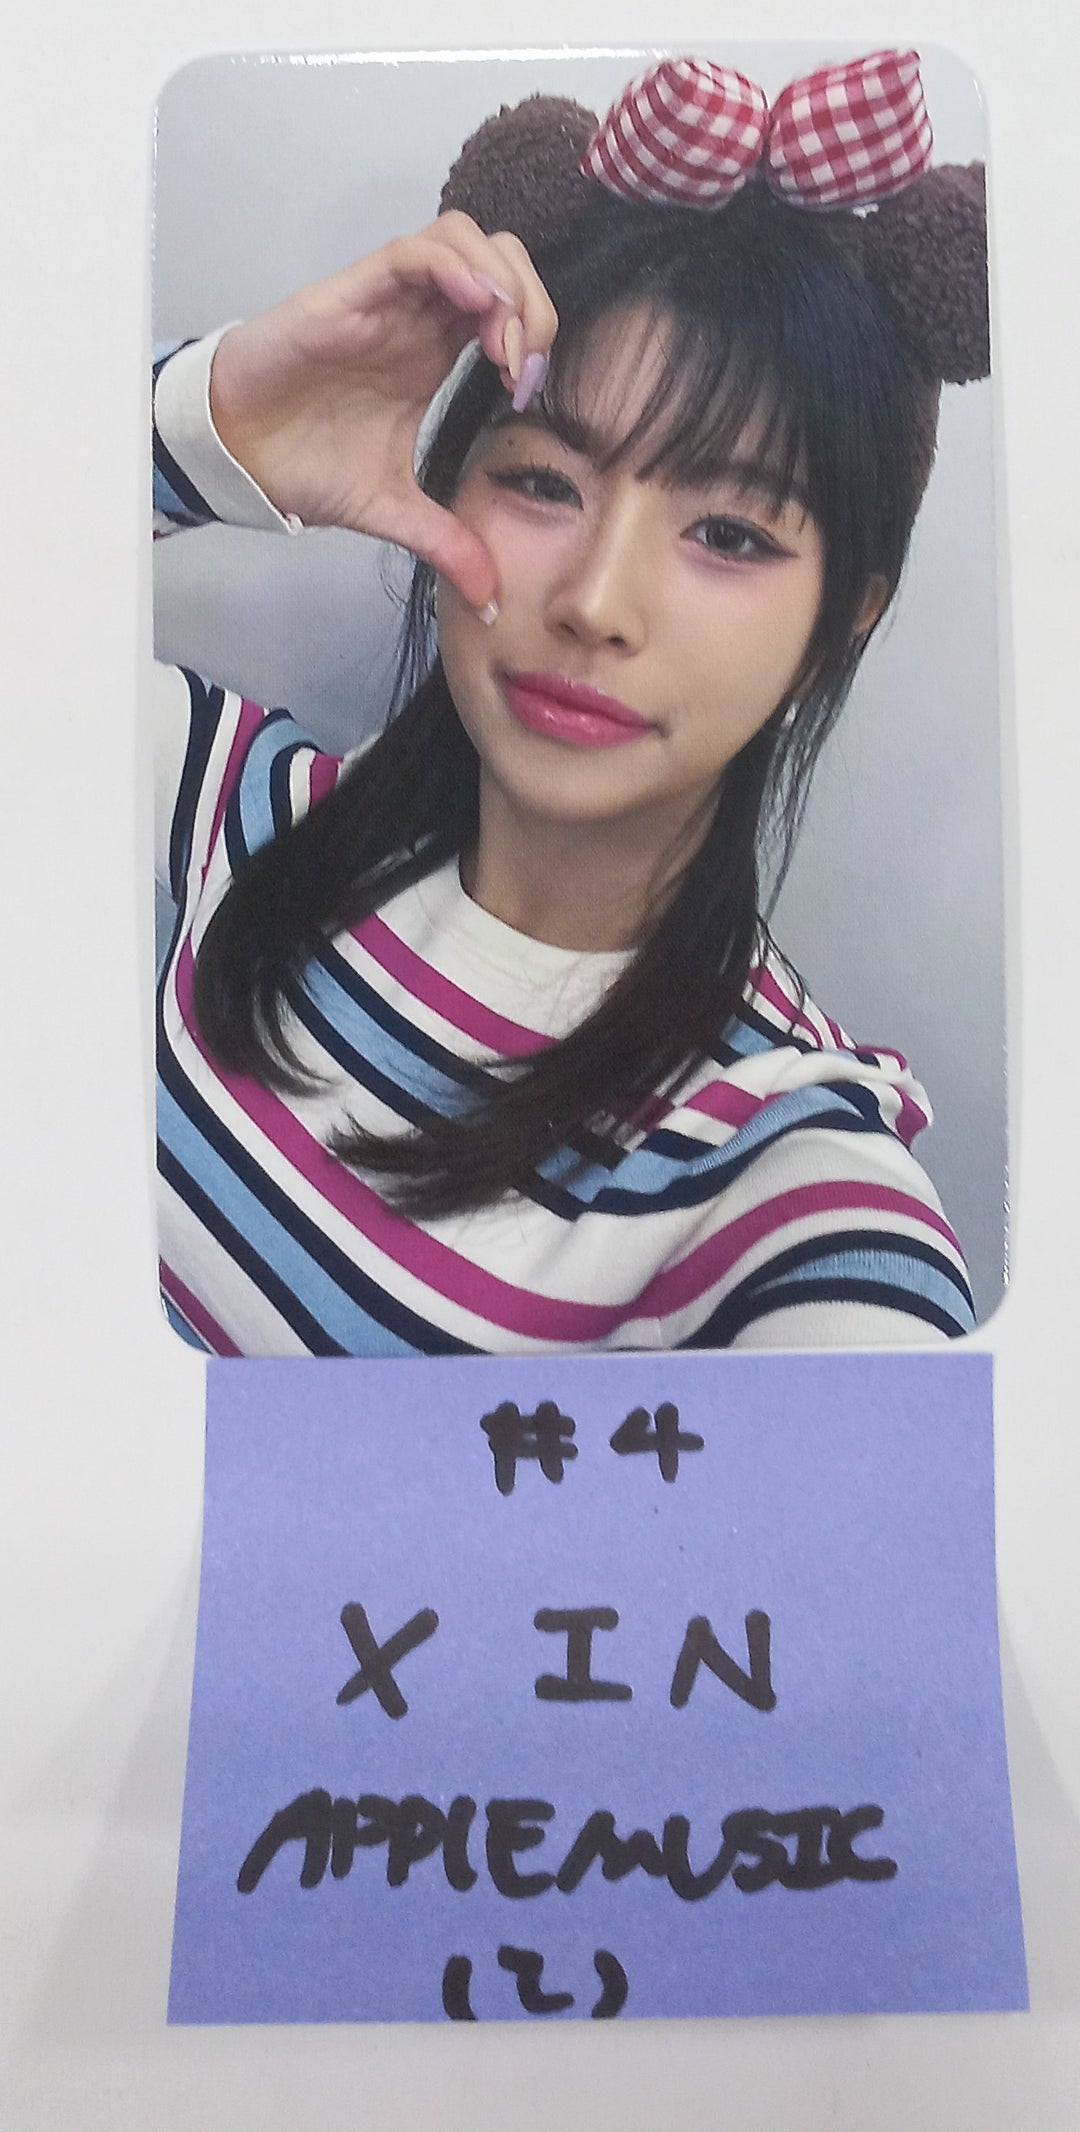 X:IN "THE REAL" - Apple Music Special Event Photocard [24.2.29]